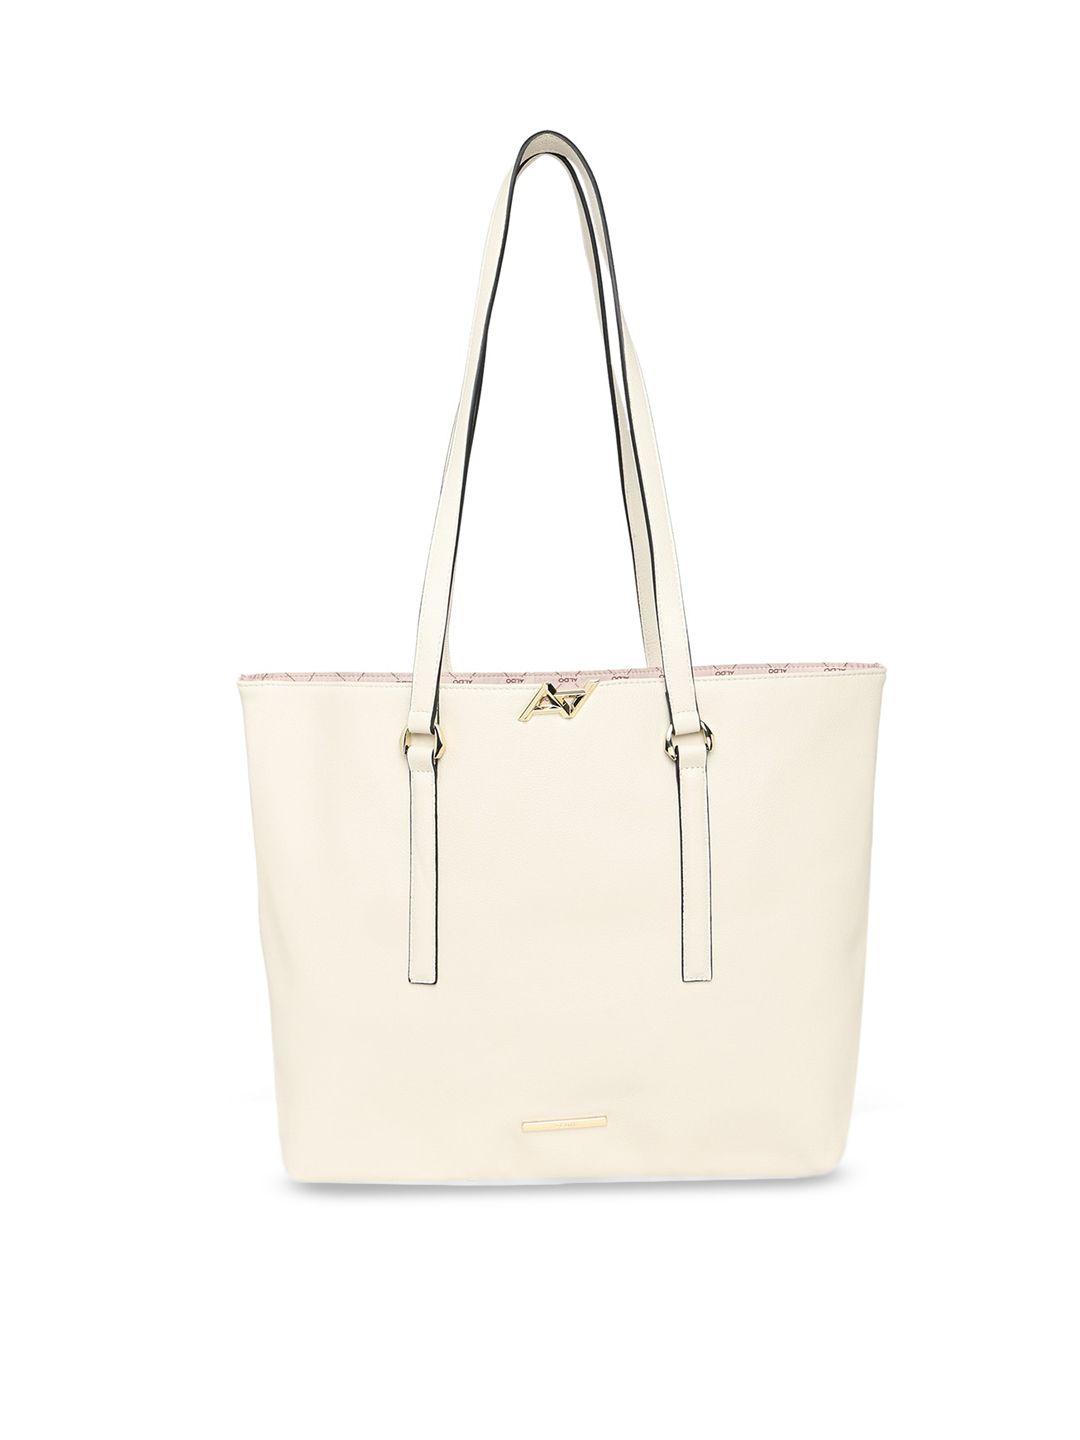 aldo textured oversized structured tote bag